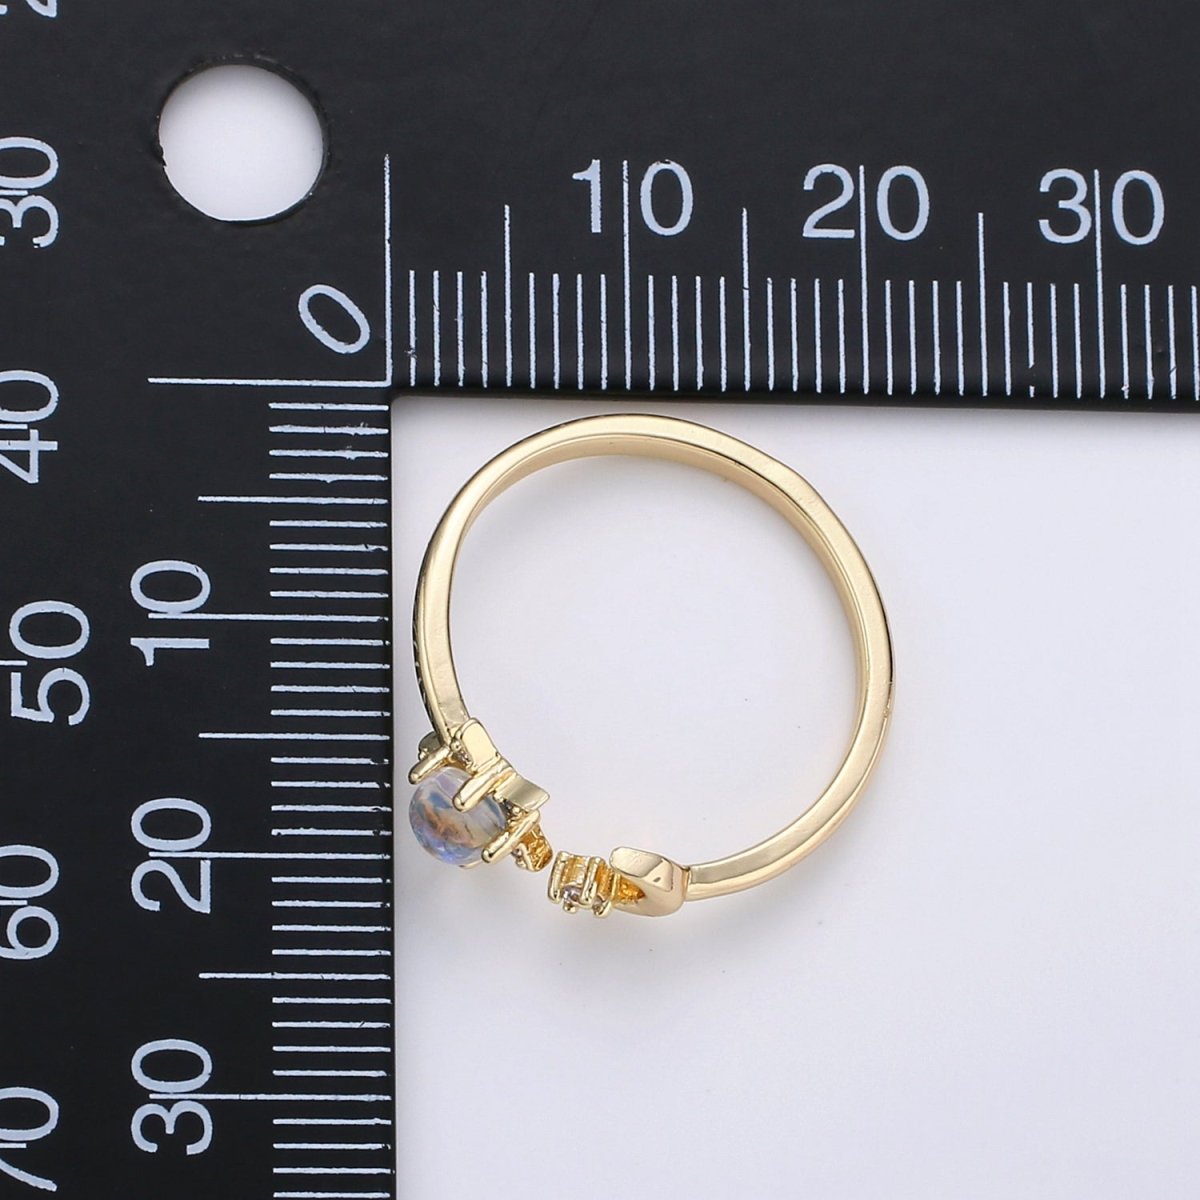 Crescent Moon Ring, Dainty Moon Ring, Adjustable Ring, Minimalist Moon Ring, Minimalist Ring, Gold Open Ring, Celestial Jewelry | R-087 - DLUXCA